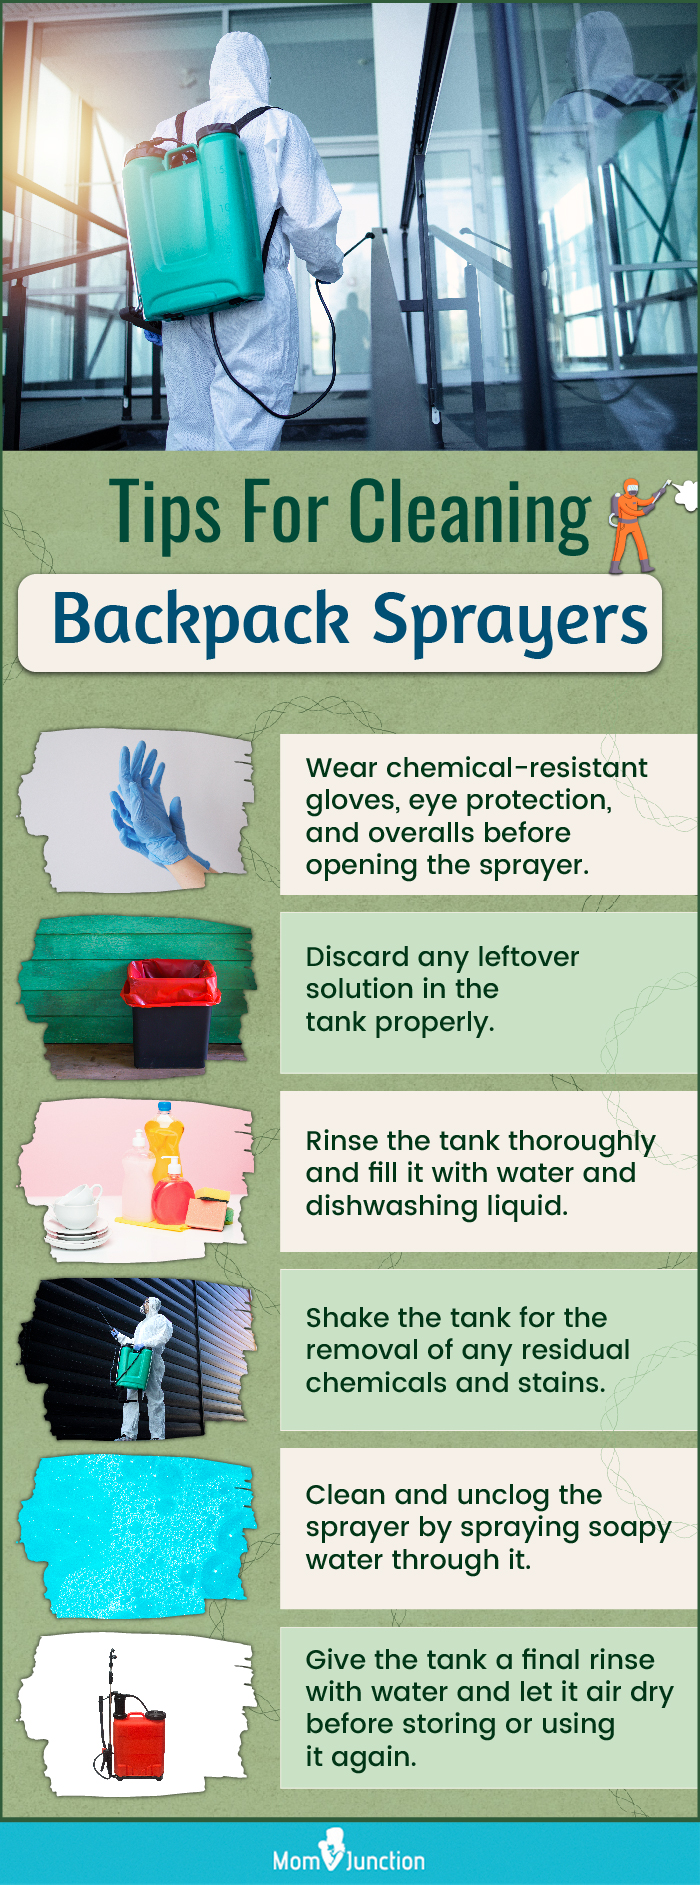 Tips For Cleaning Backpack Sprayers. (infographic)